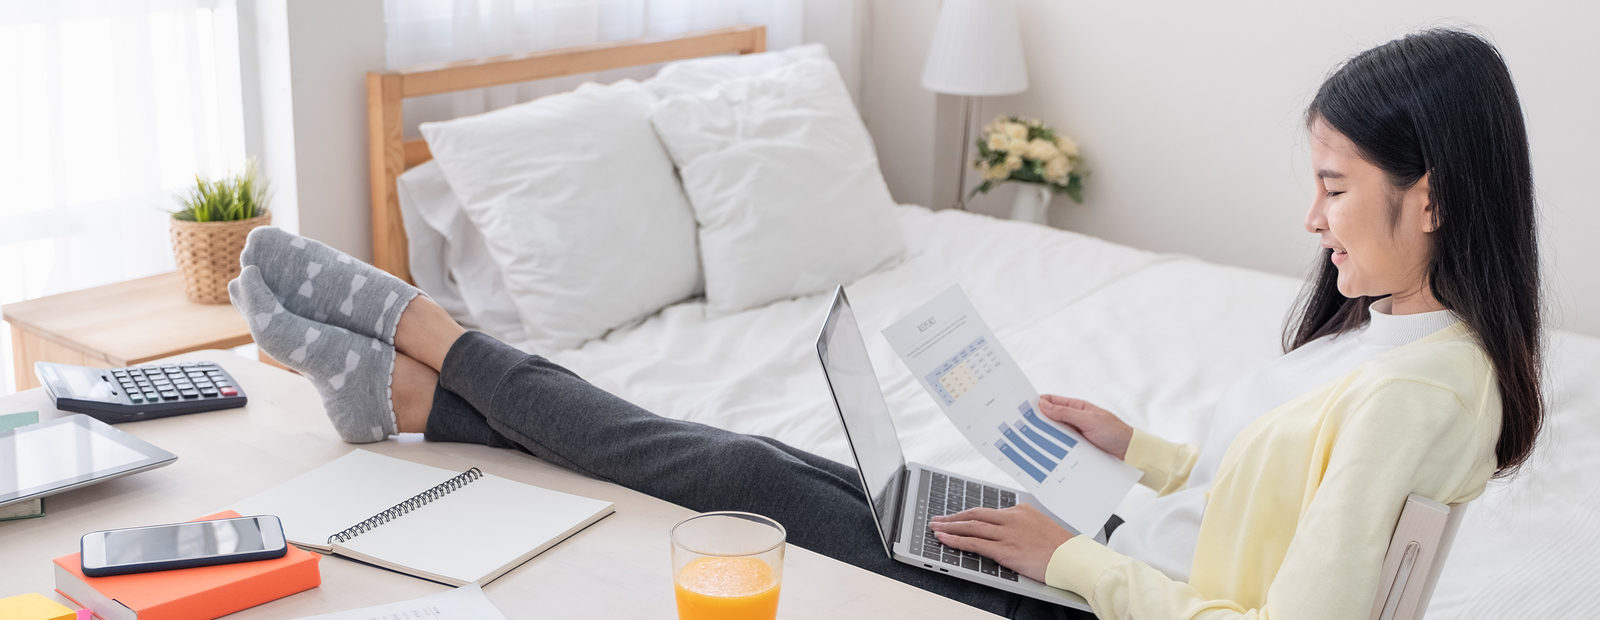 How To Set Up Your Bedroom For Working From Home